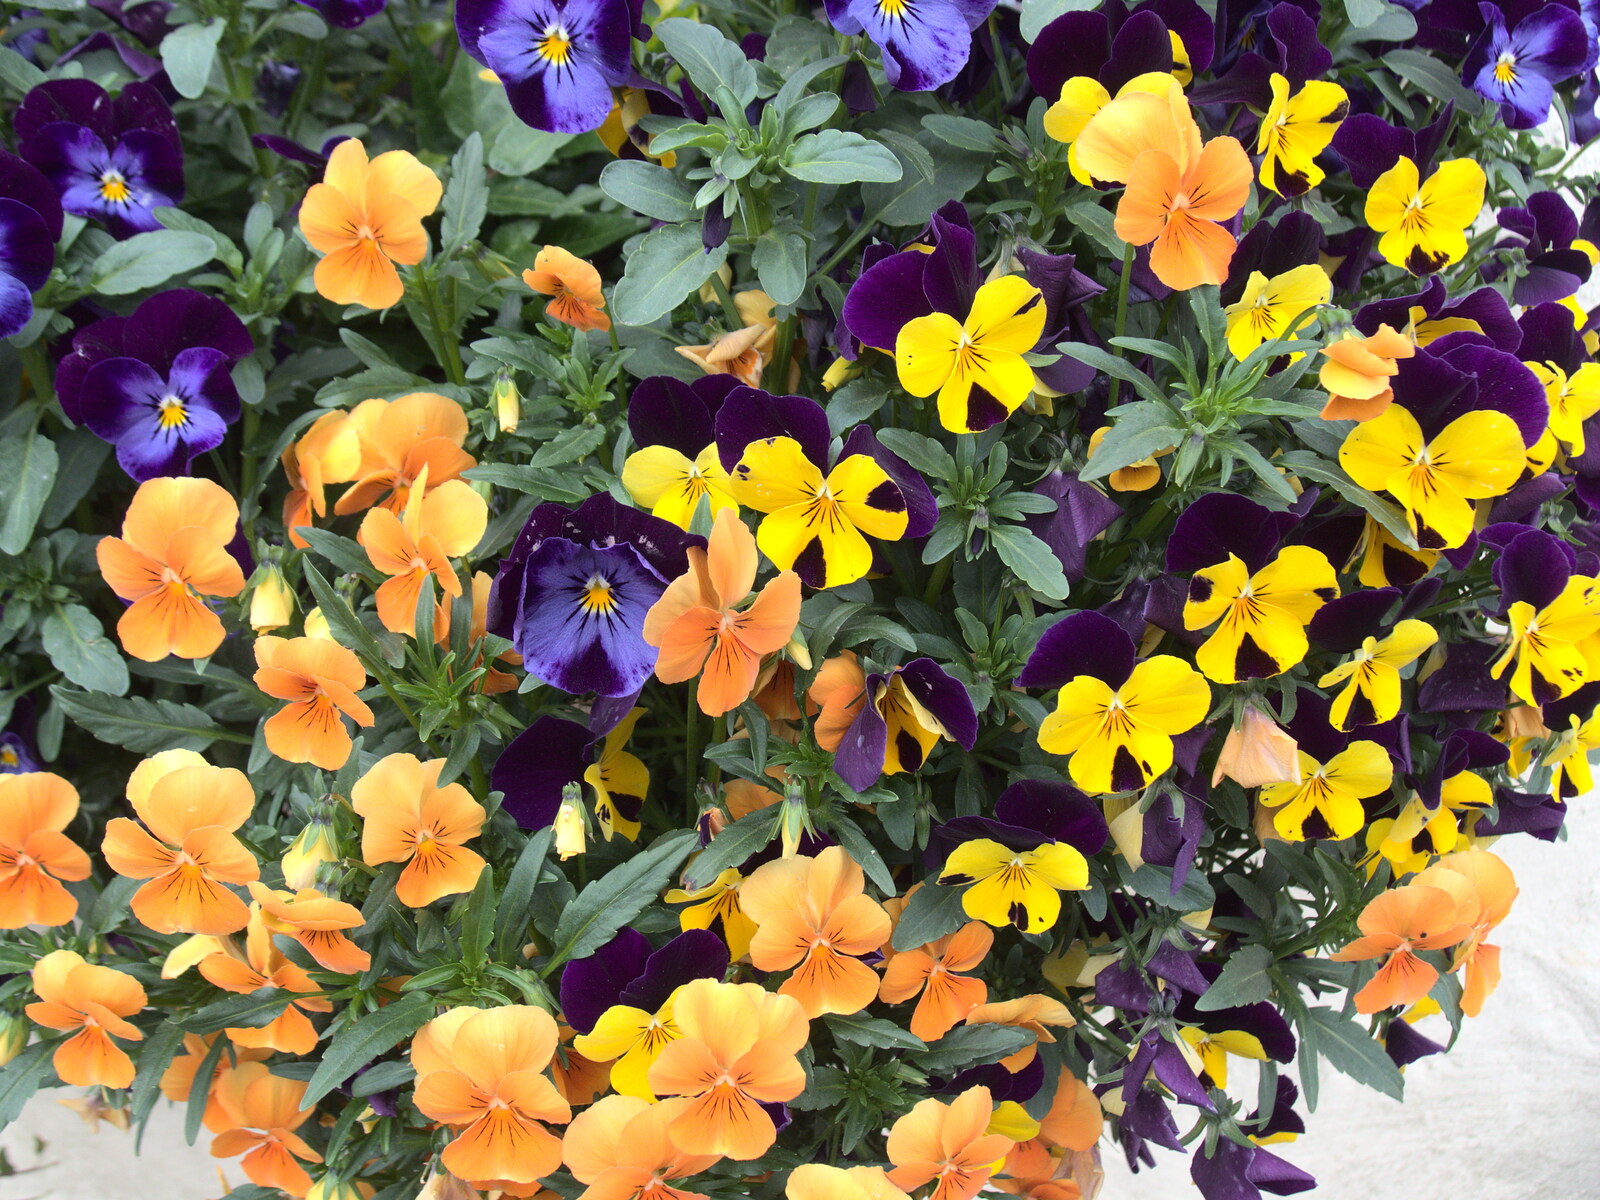 Pansies in a hanging basket from The Last-Ever BSCC Weekend Away Bike Ride, Thaxted, Essex - 6th May 2017